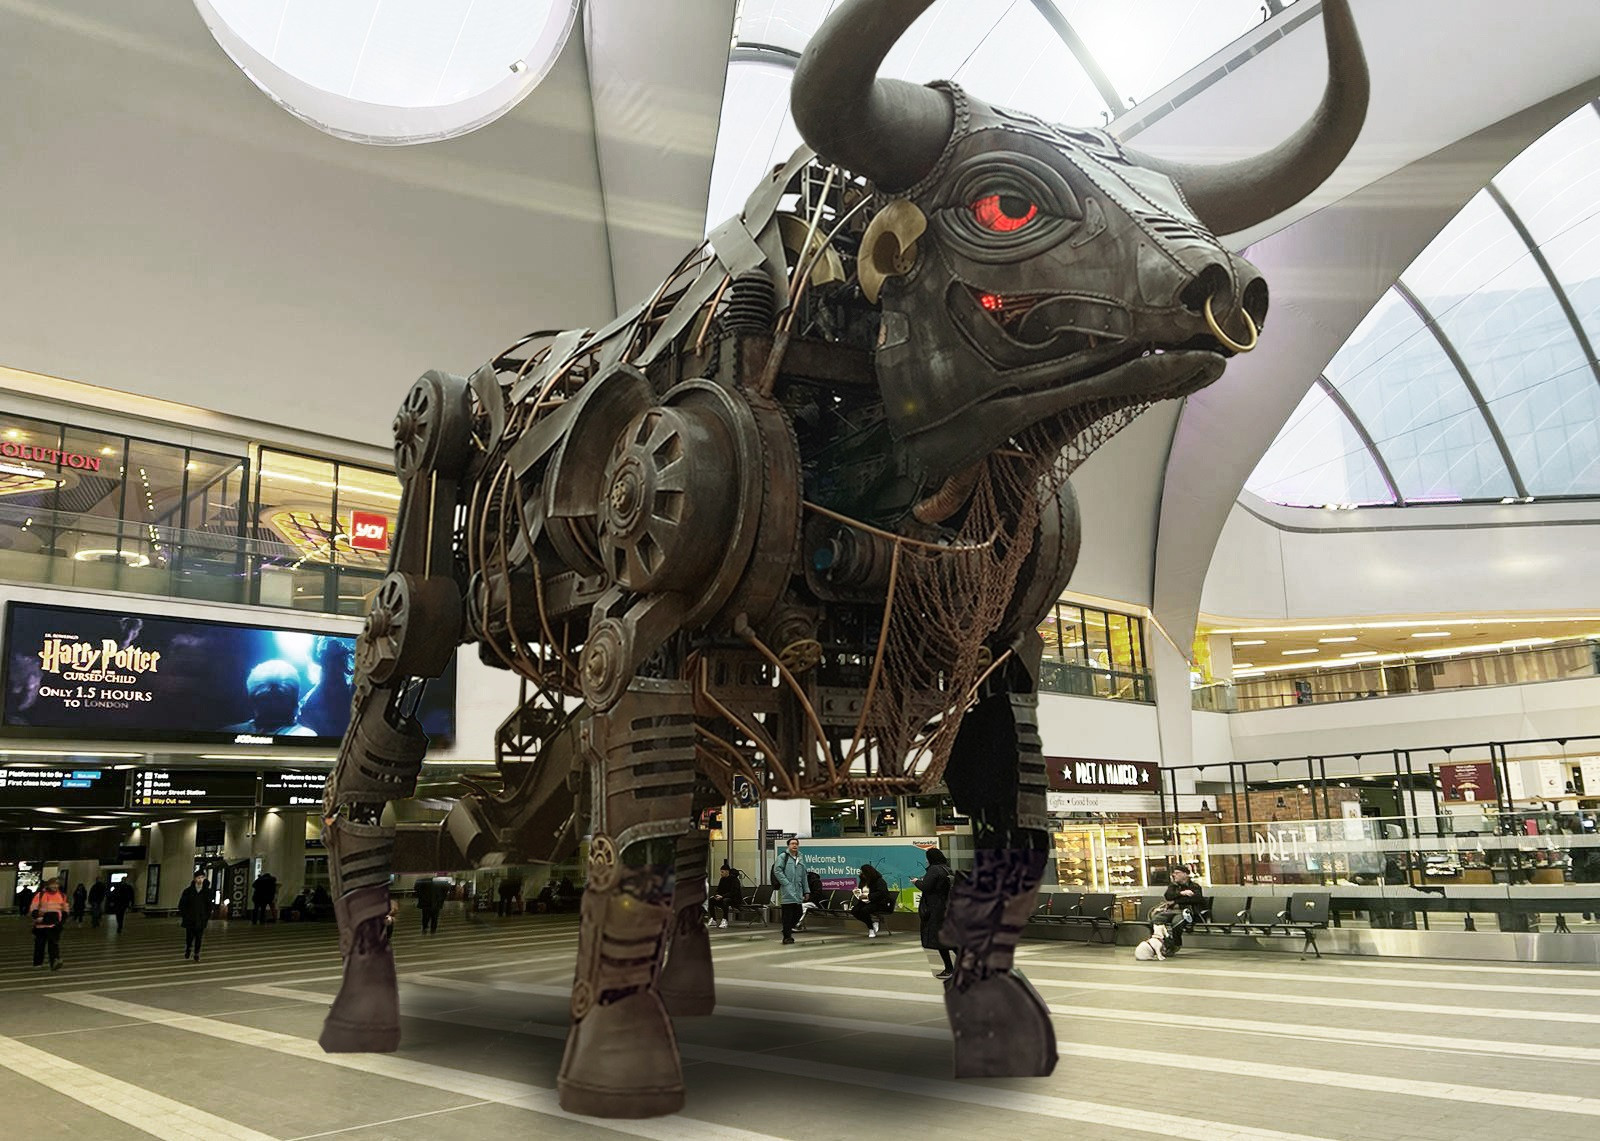 Birmingham 2022 "Raging Bull" named after rock legend before moving to new home